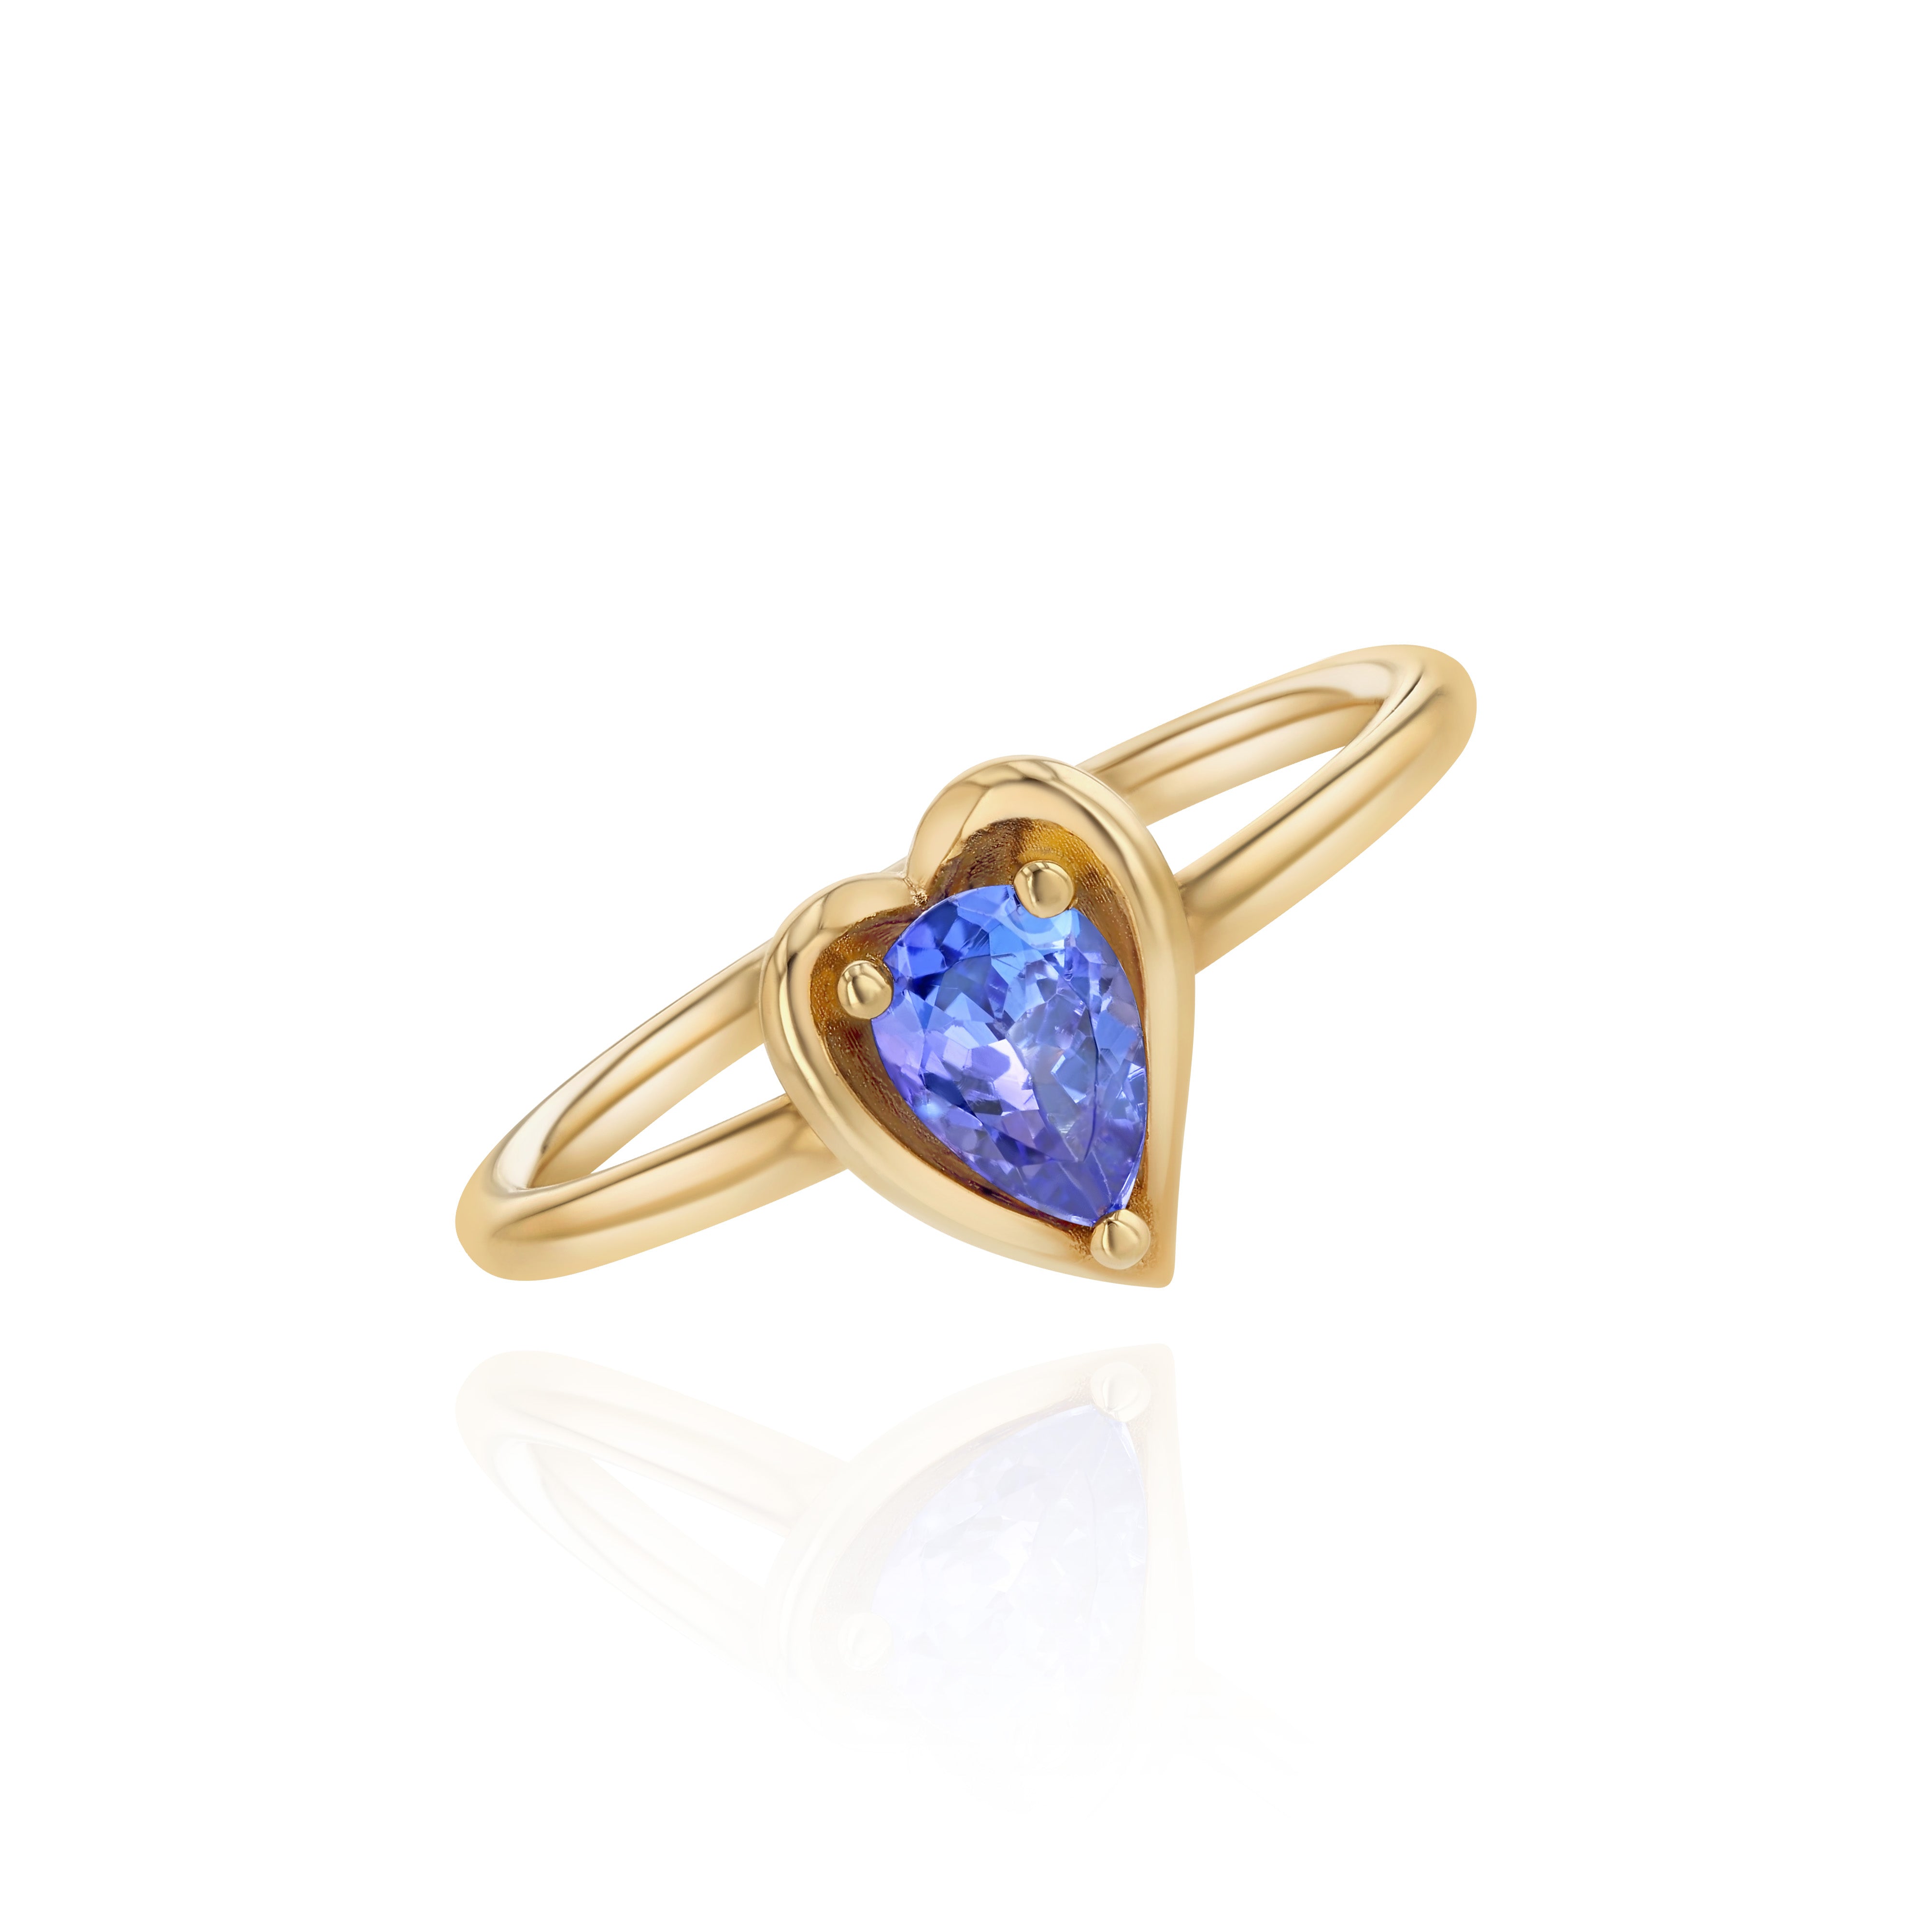 Yellow Gold heart shaped ring with a pear shaped Tanzanite, Small